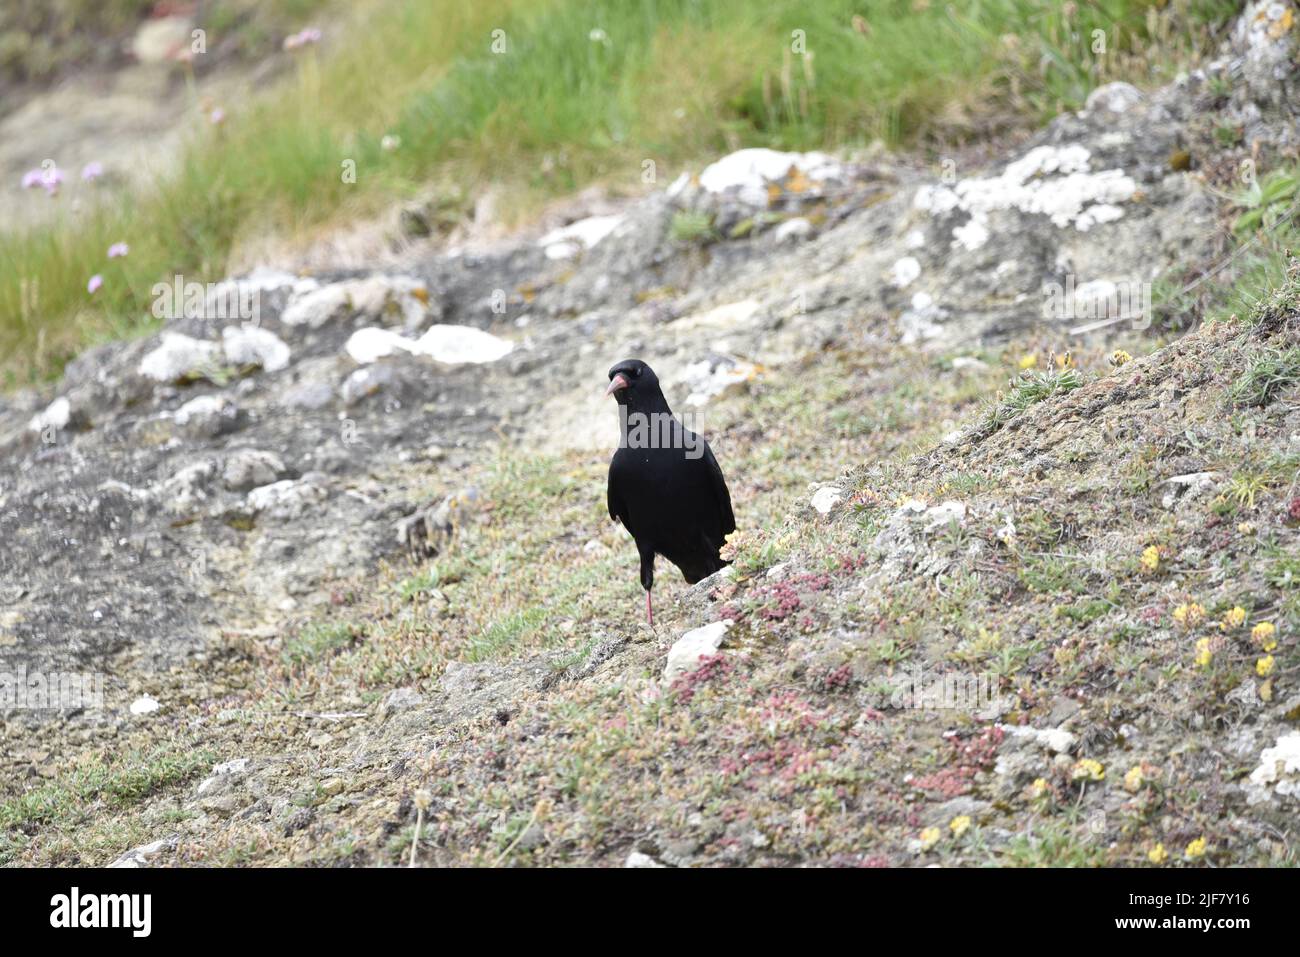 Close-Up Front-Facing Image of a Red-Billed Chough (Pyrrhocorax pyrrhocorax) Looking Quizzical, Standing on Rocks with Grass and Wildflower Background Stock Photo